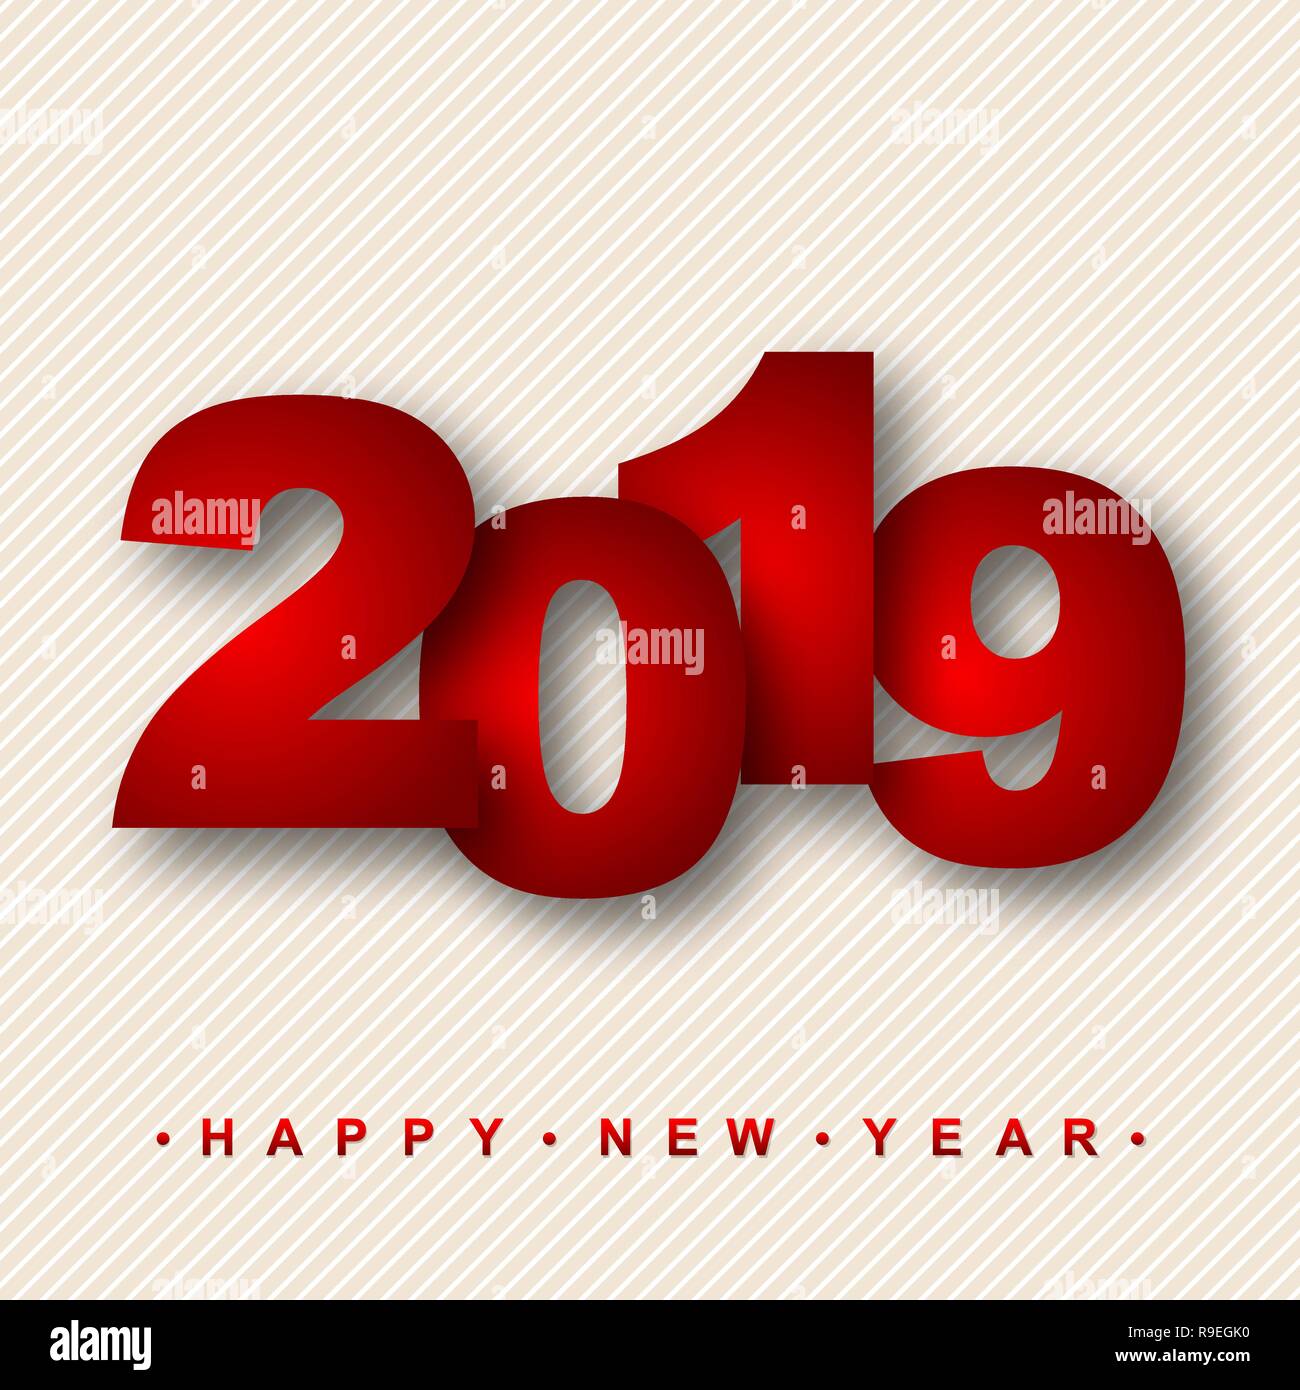 2019 Happy New Year. Vector illustration. Holiday greeting card with red numbers. Stock Vector